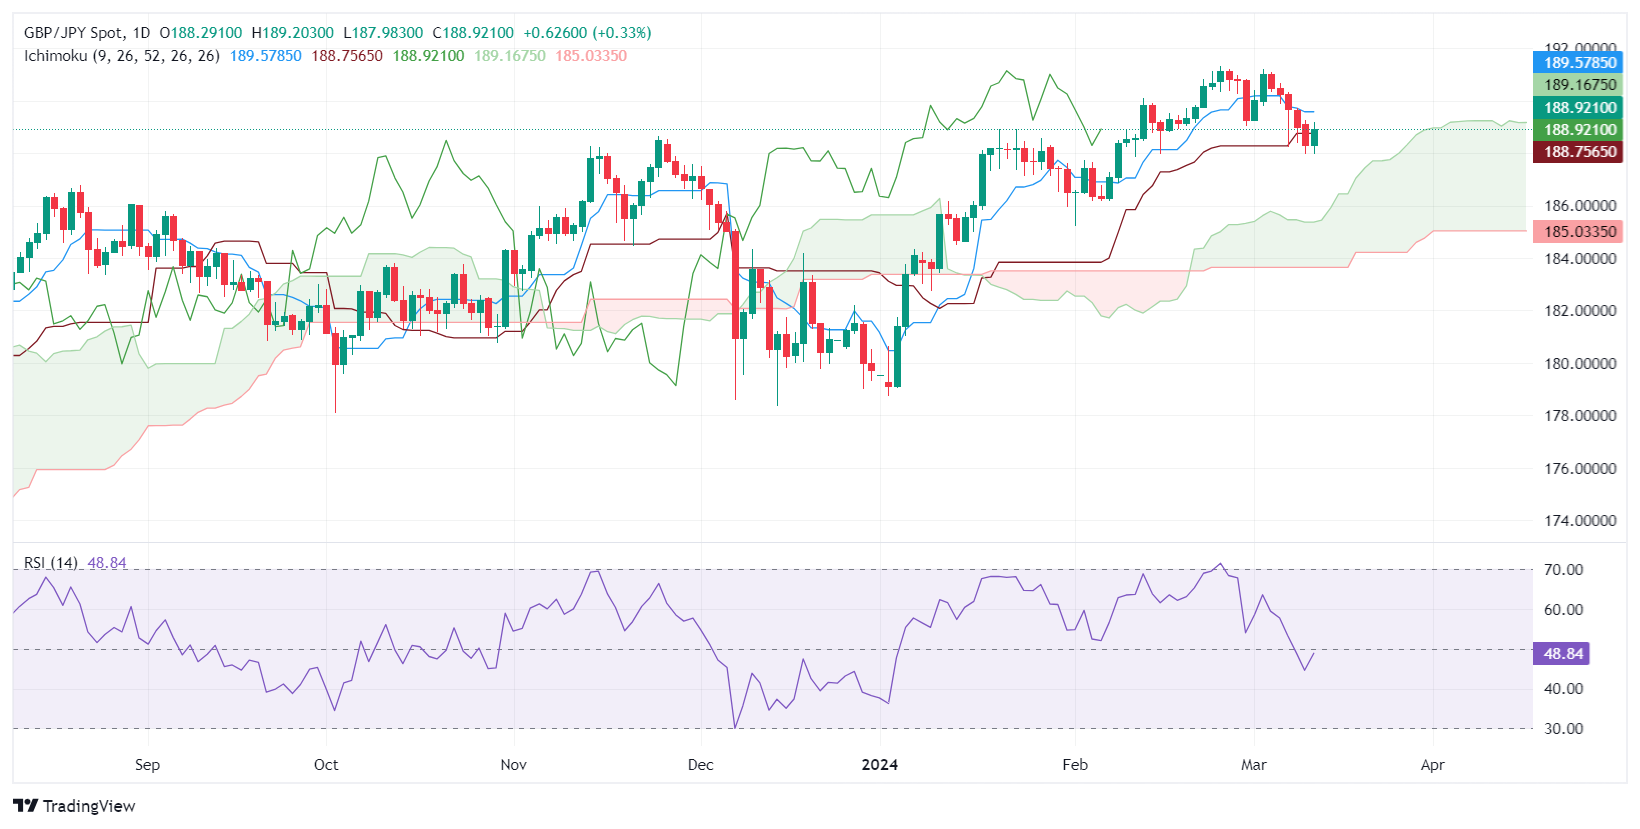 GBP/JPY NUDGES HIGHER AMID BOJ’S CAUTIOUS OUTLOOK, MIXED UK JOBS REPORT